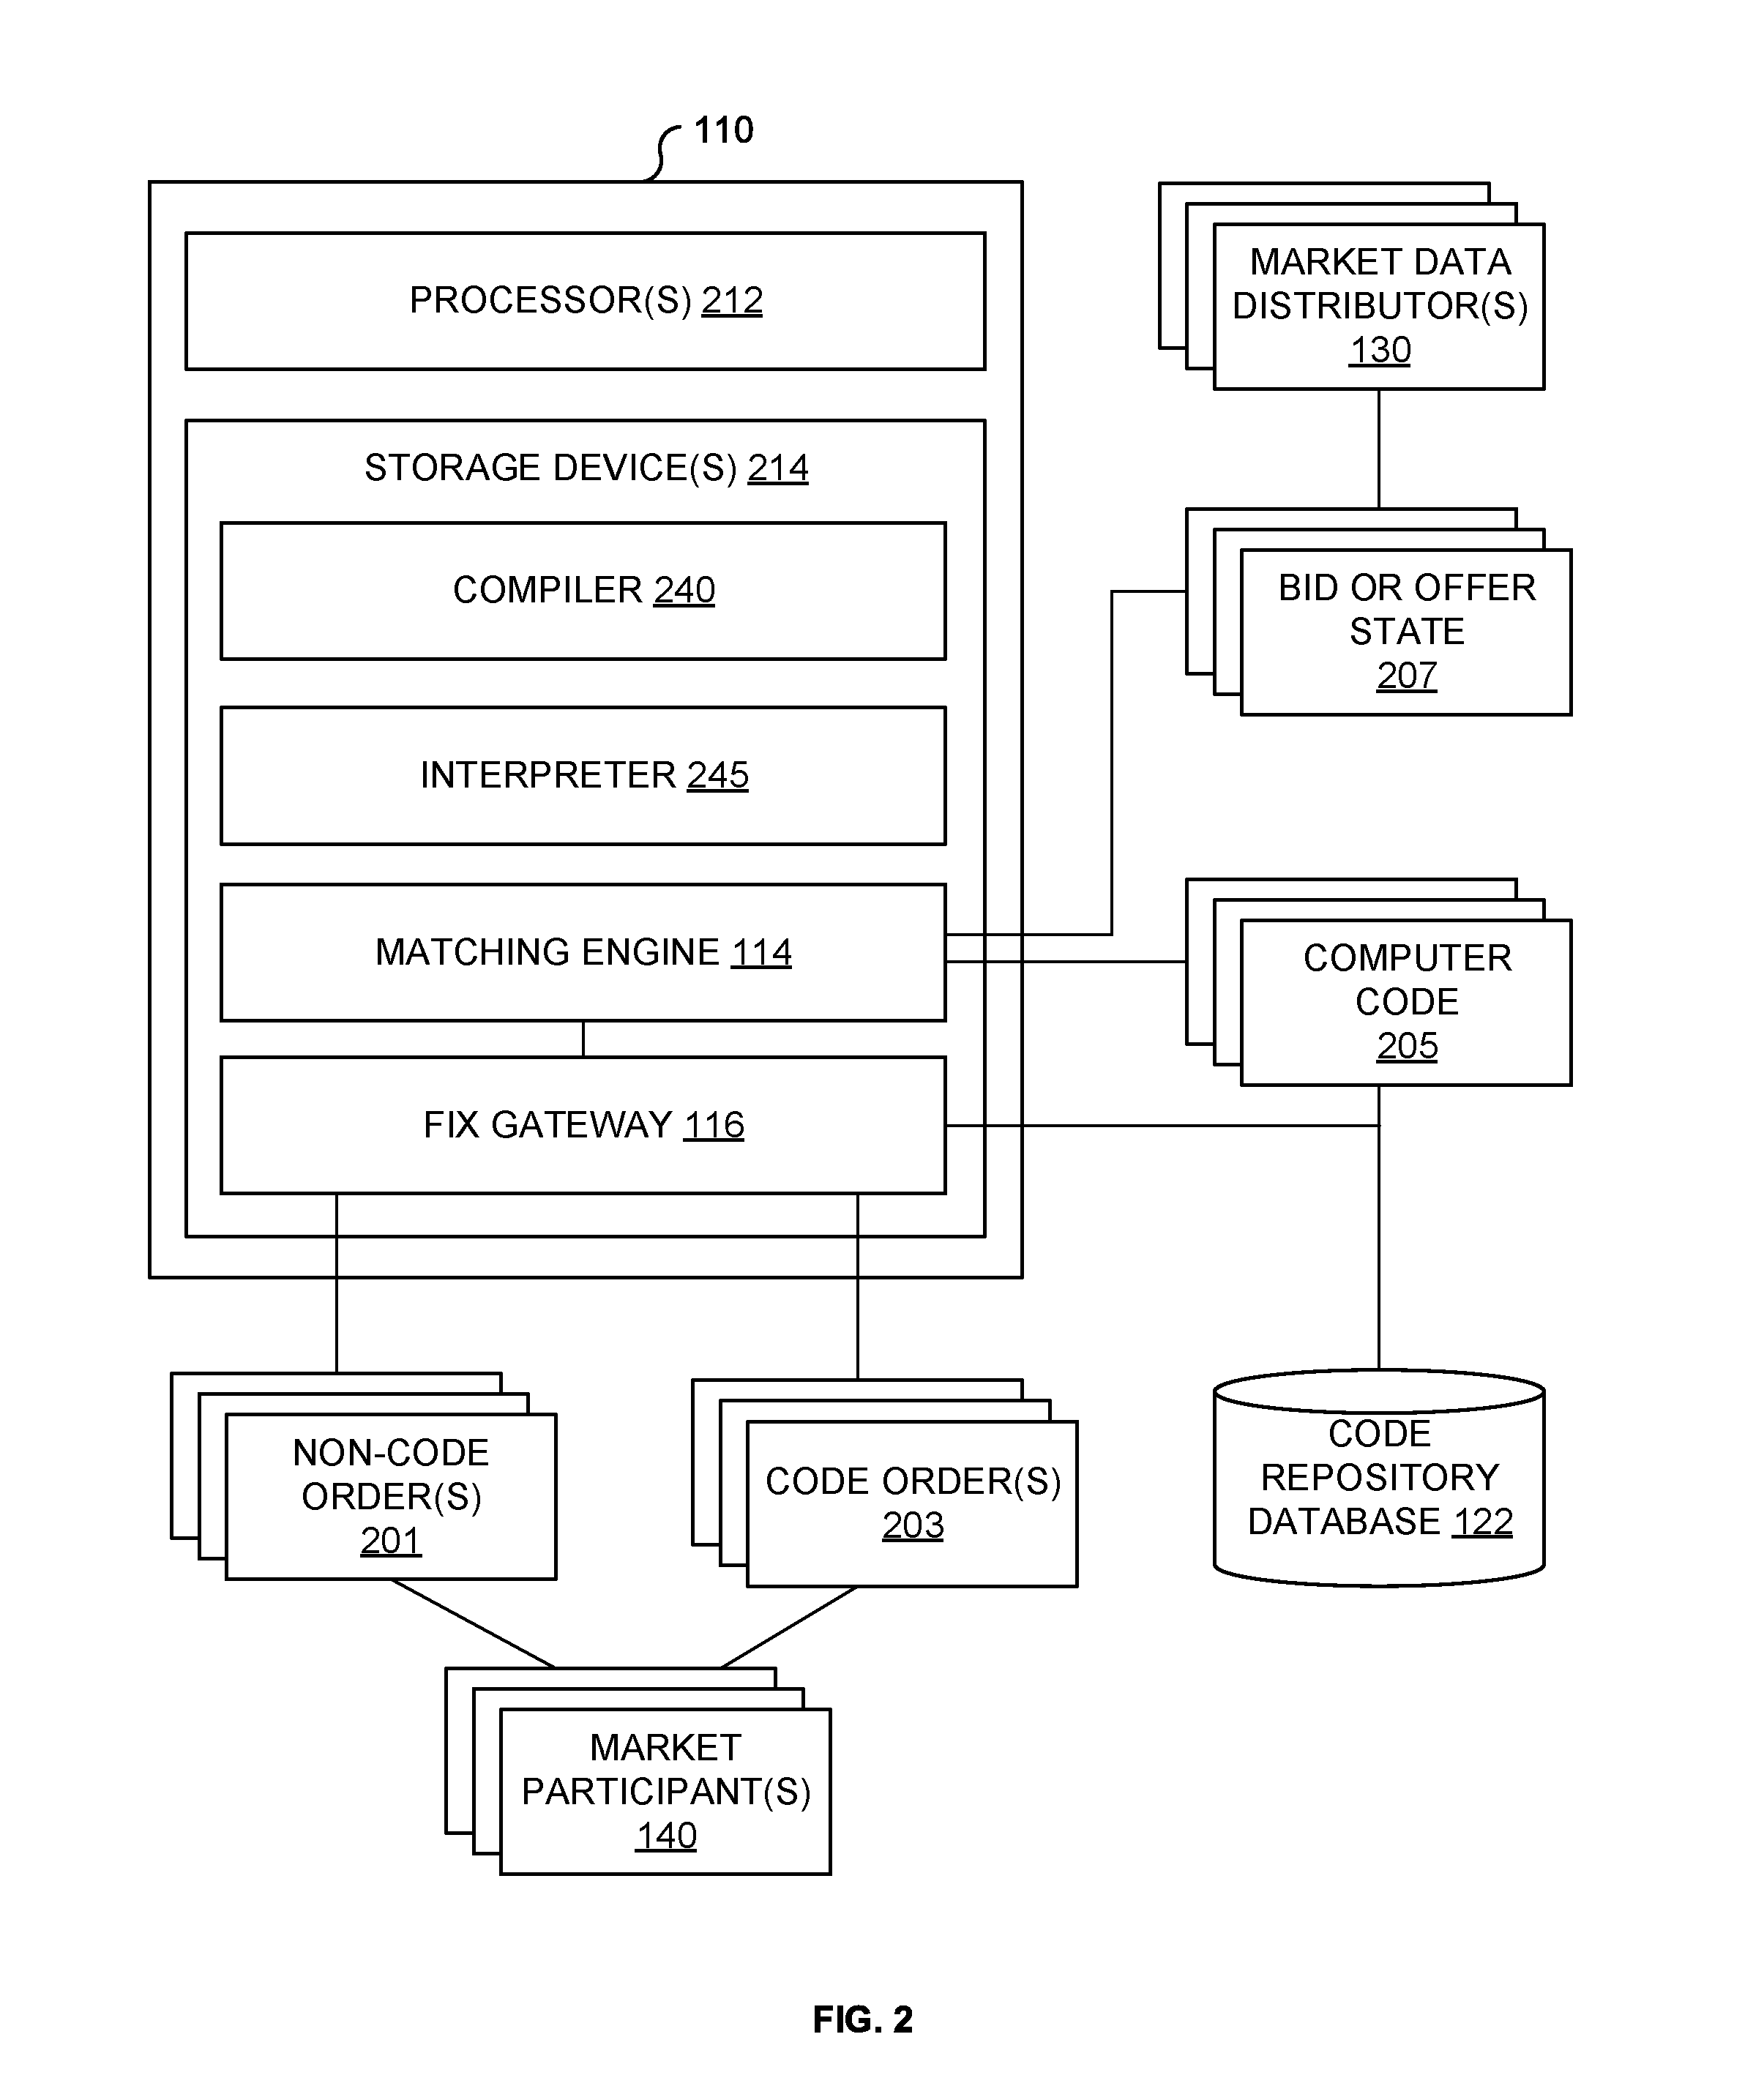 Systems and methods for obtaining and executing computer code specified by code orders in an electronic trading venue